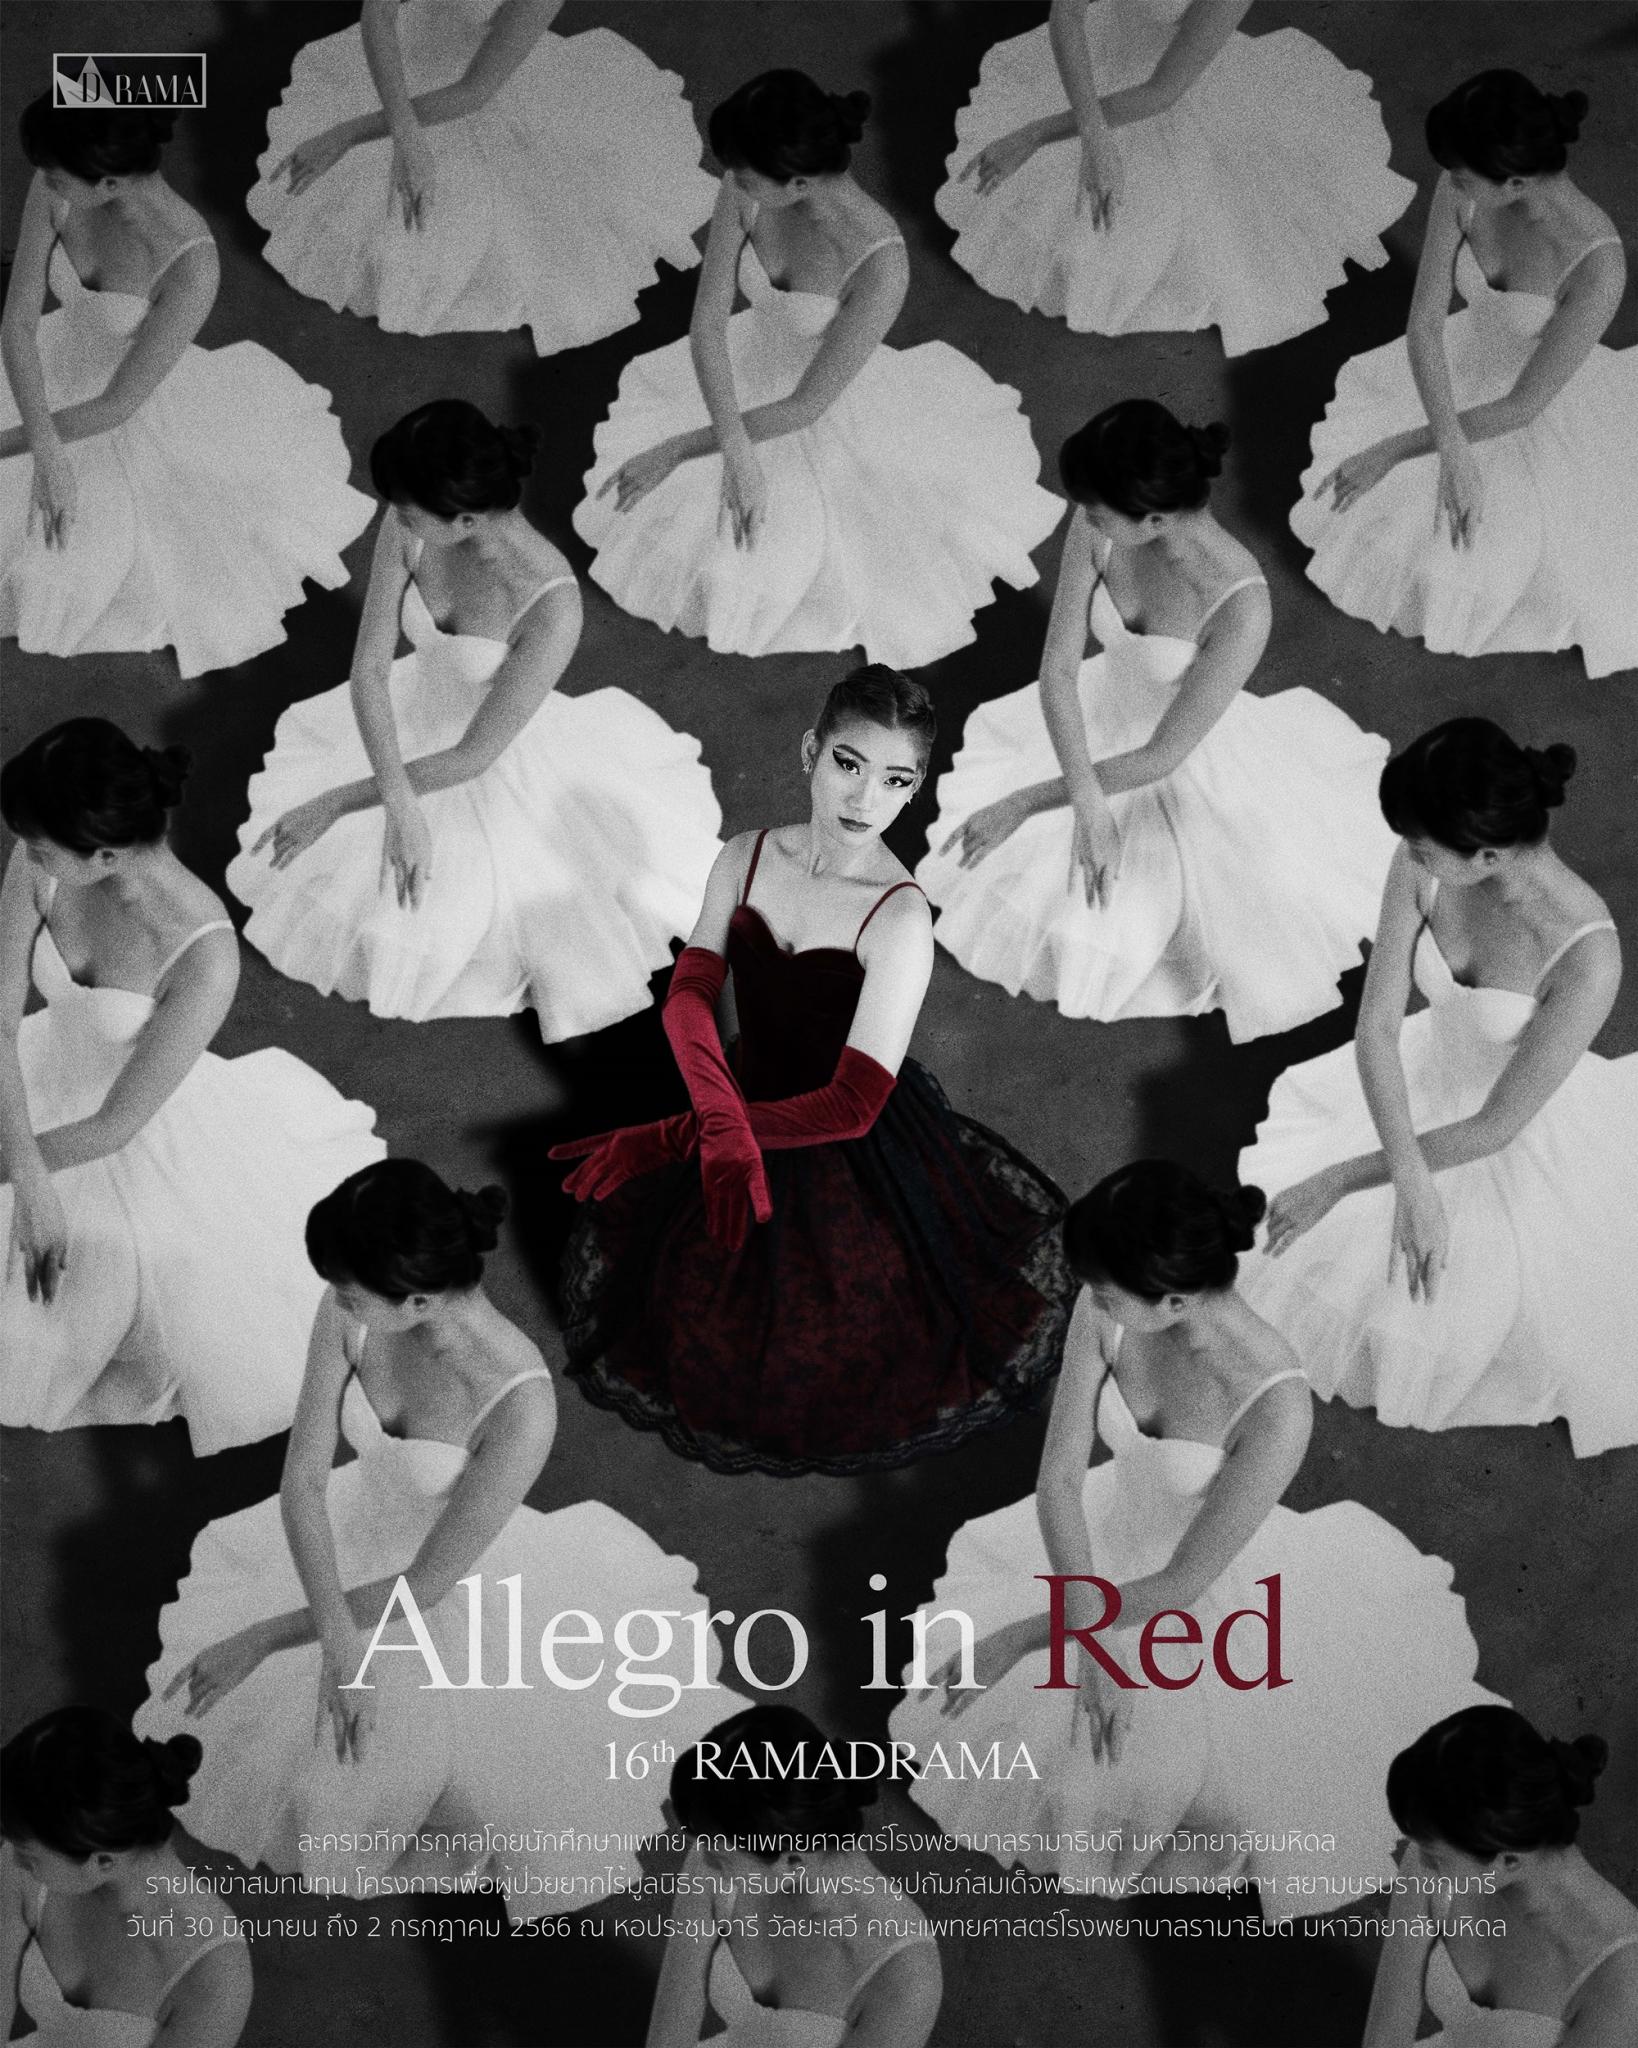 Allegro in Red 16th RAMADRAMA